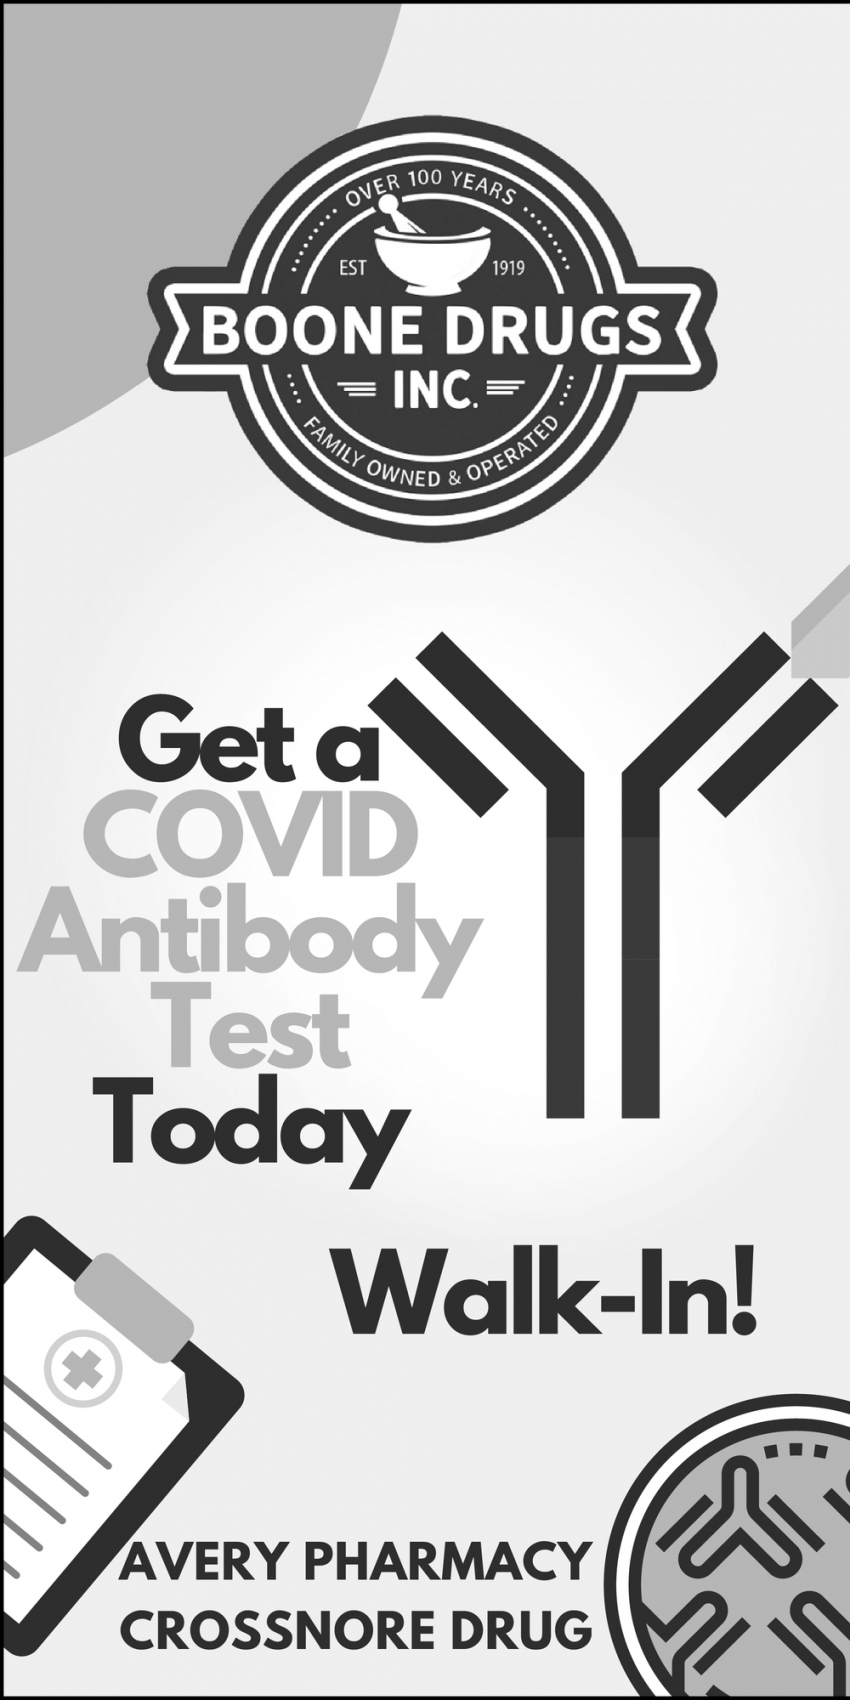 Get COVID Anitbody Test Today